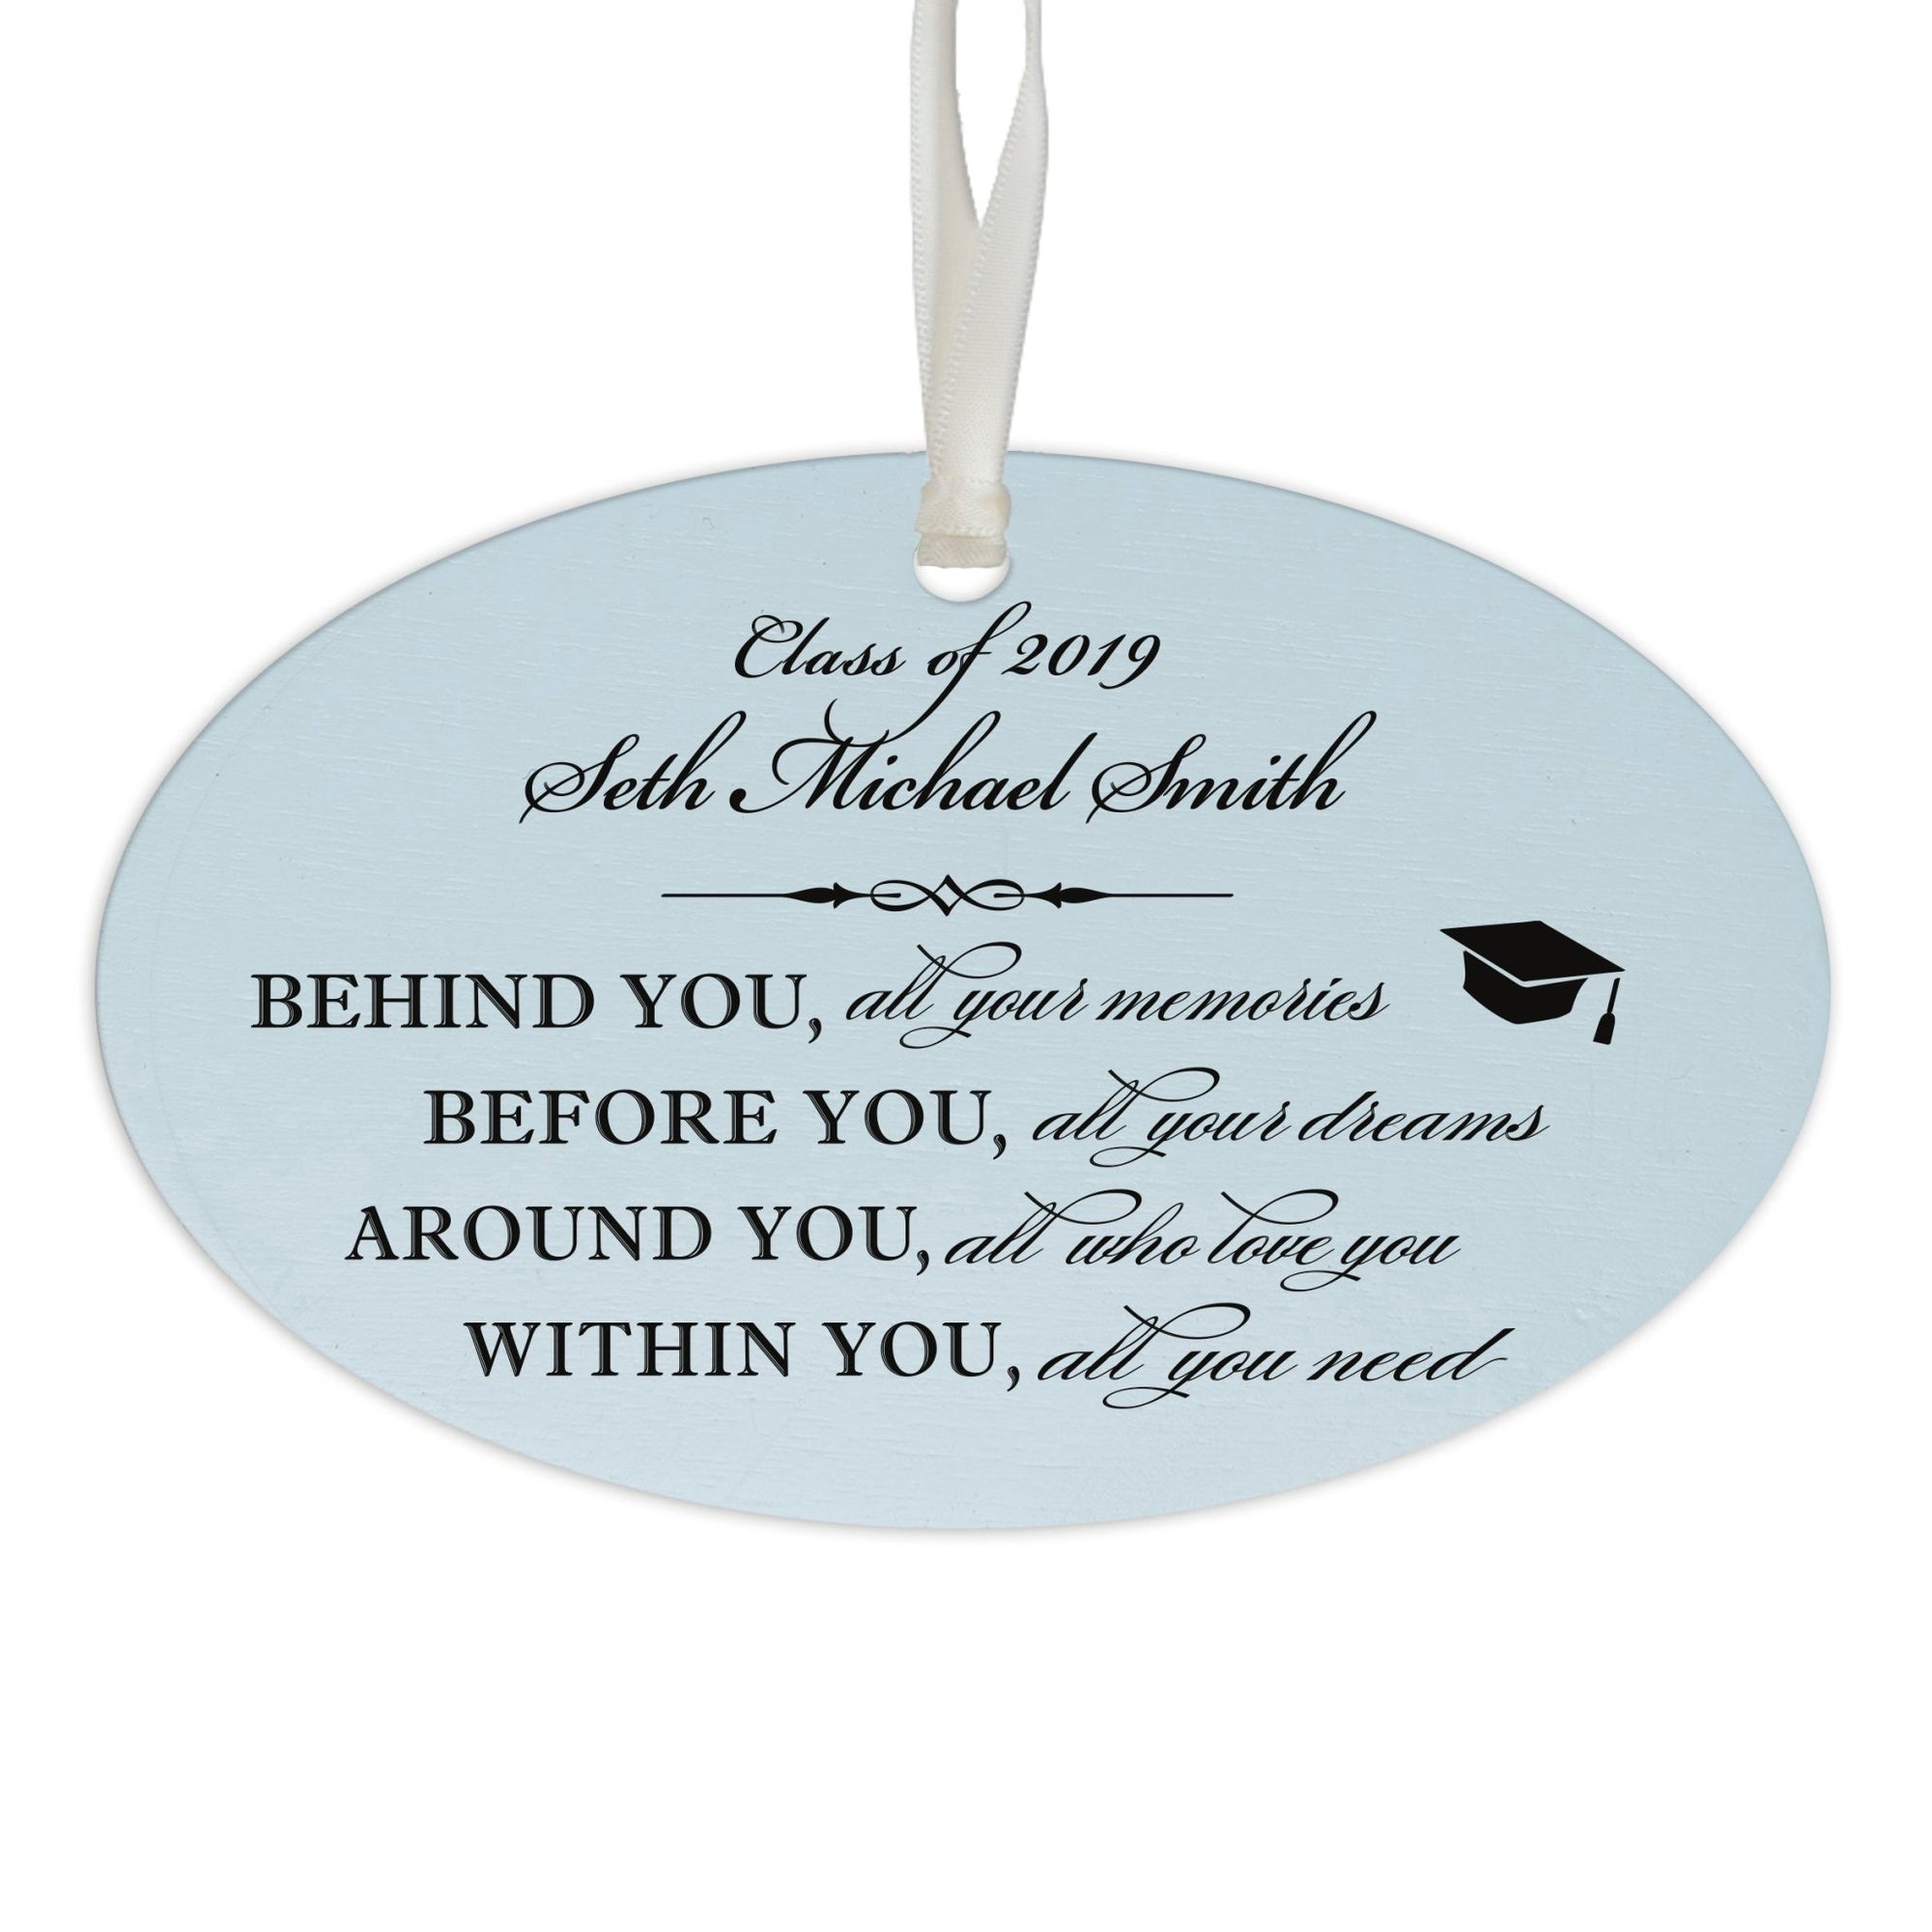 Personalized Graduation Ornament Gift for Graduate - Behind You - LifeSong Milestones